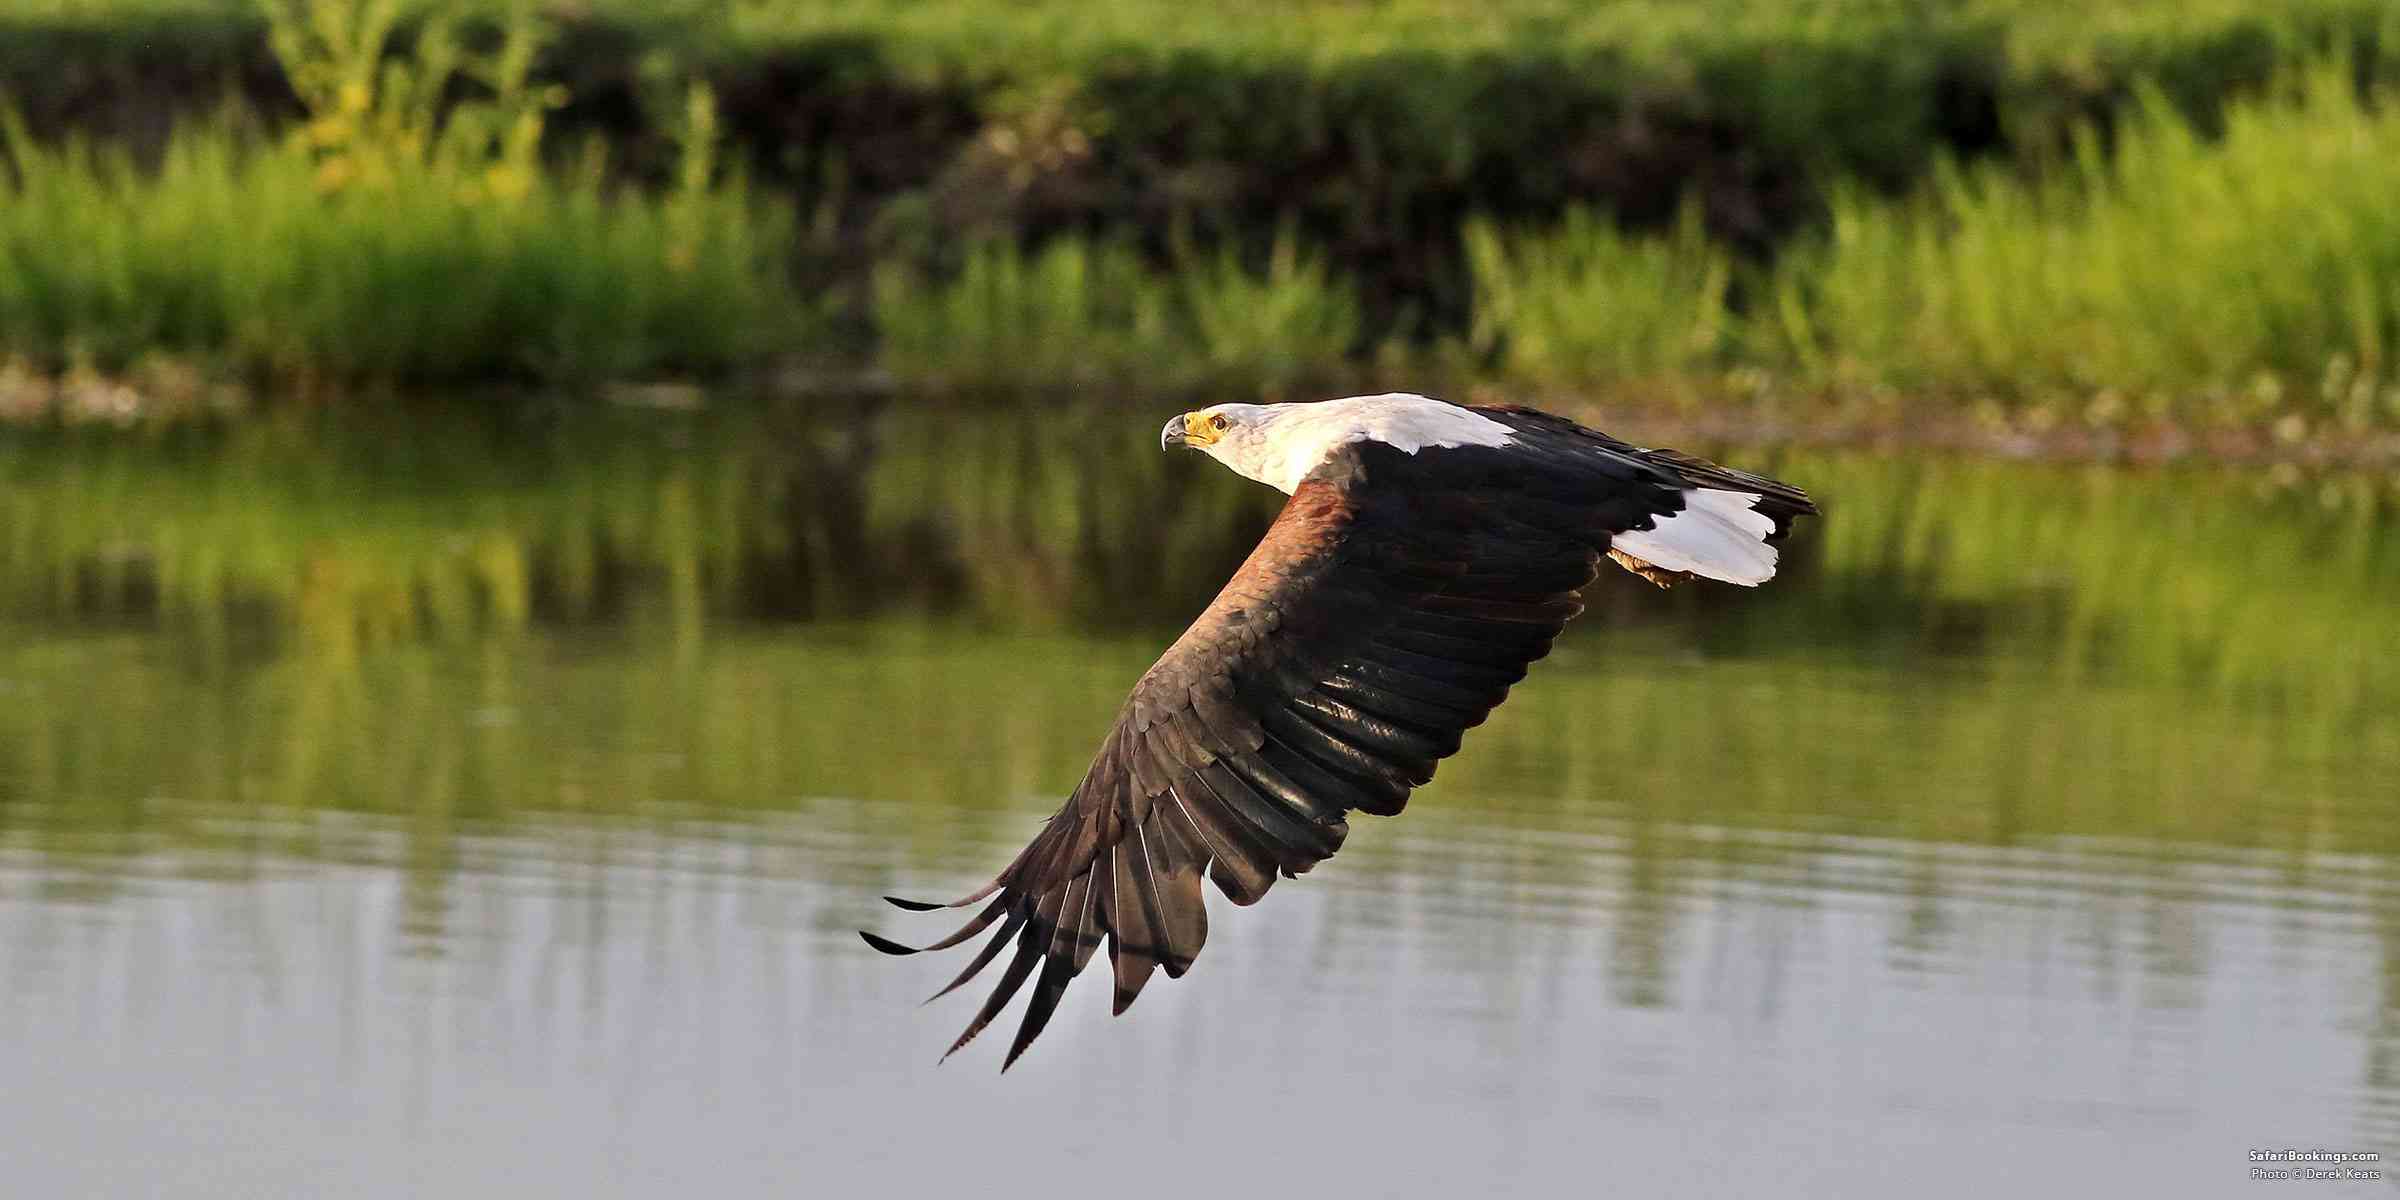 5 Fascinating Facts About the African Fish Eagle